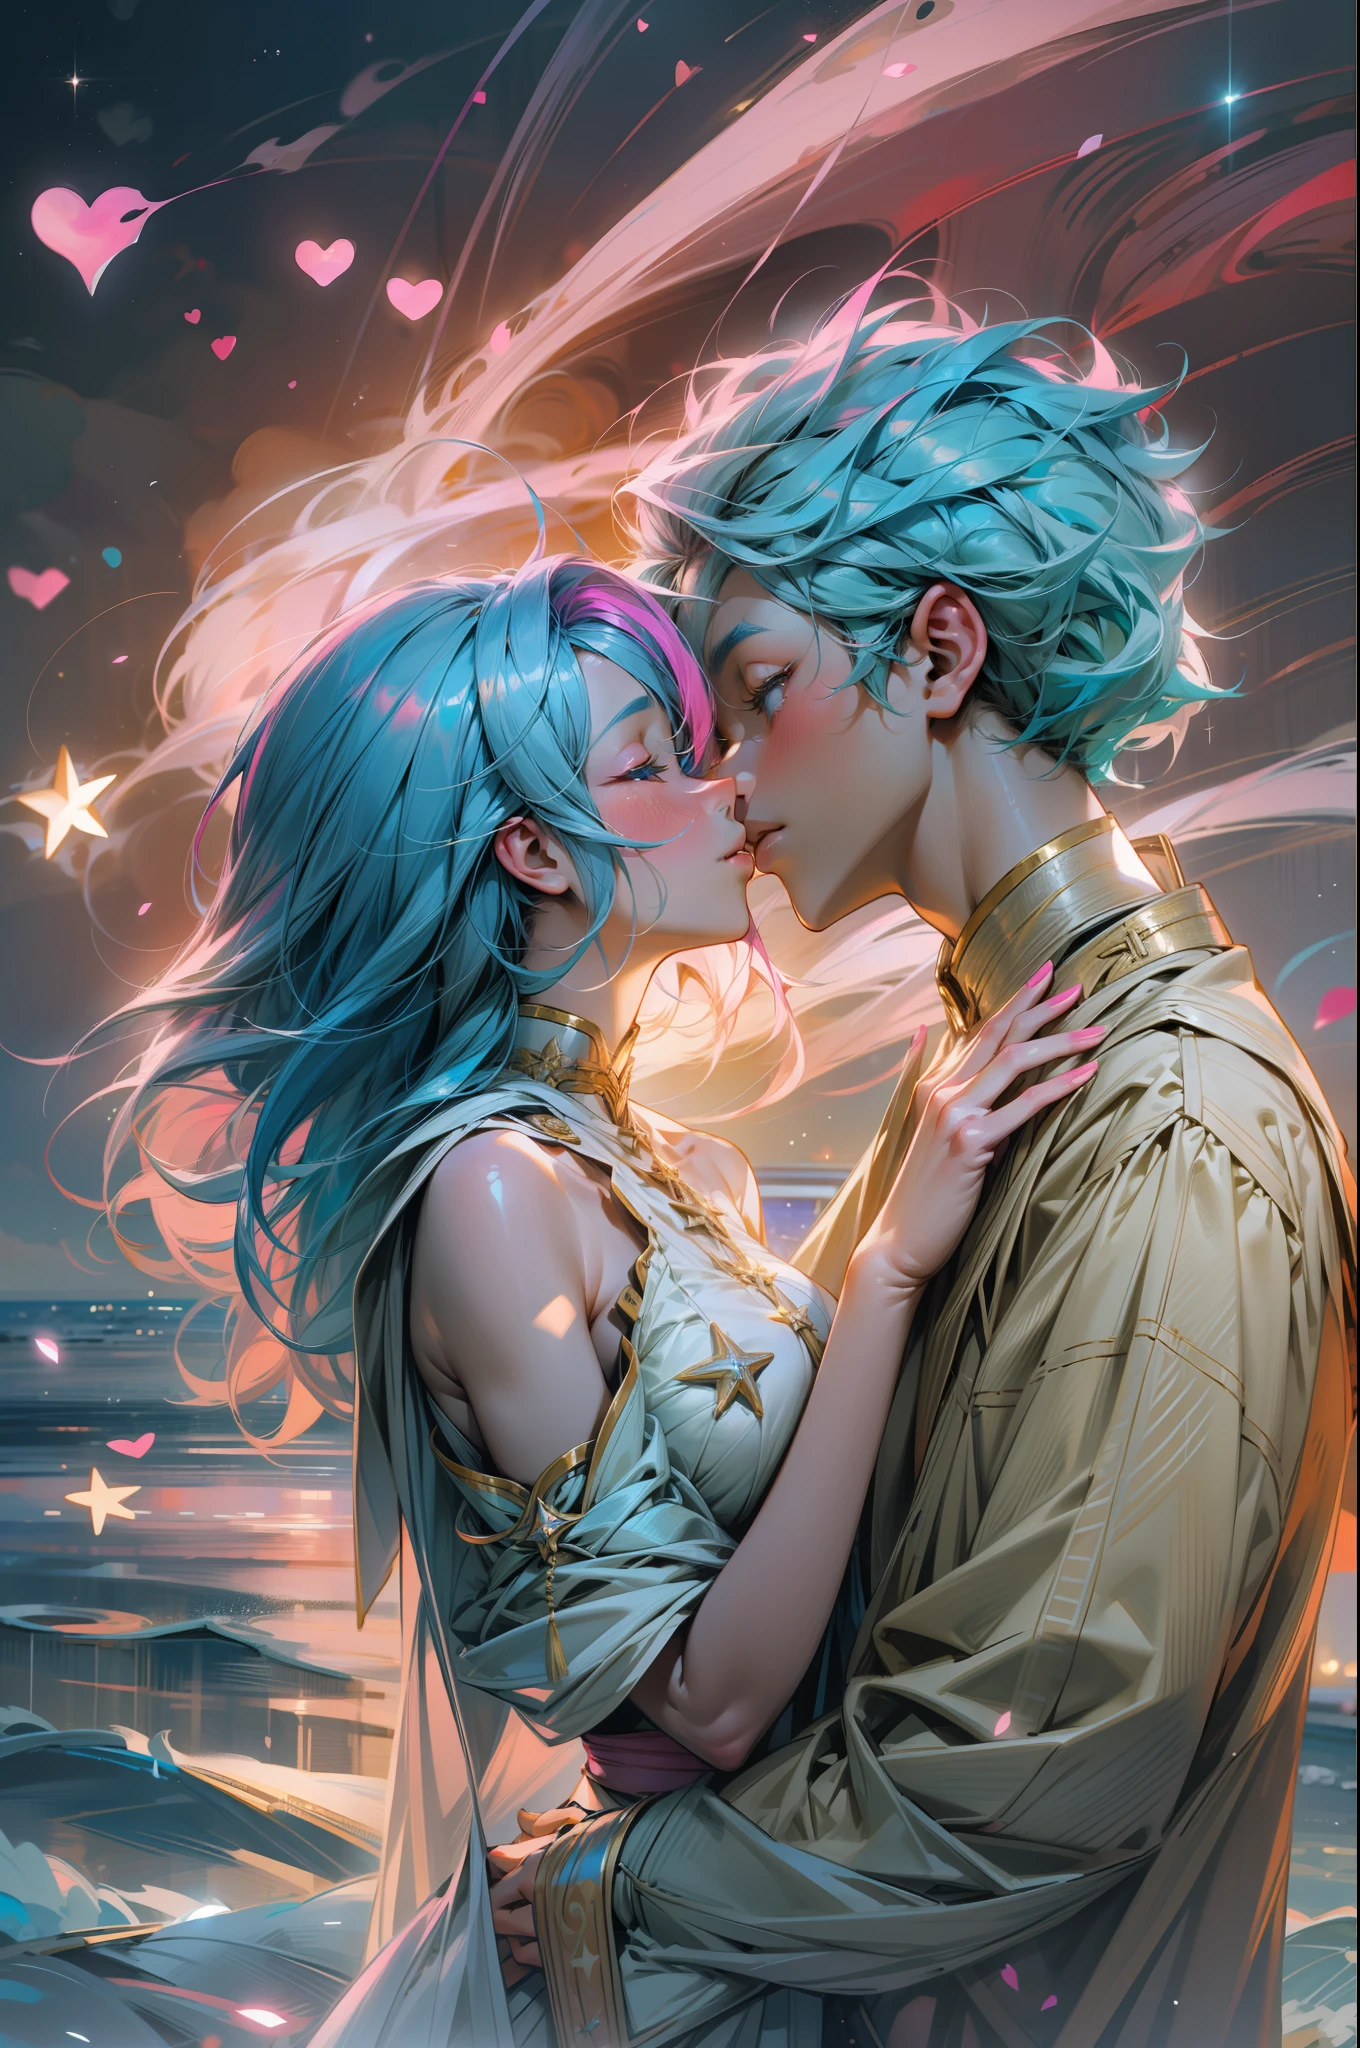 Romantic couple kissing in the wind，Blue-haired boy，Girl with pink hair，glowing stars，Glow effects，Heart-shaped bubbles，the night，On cruise ships，fire works，The face is clear and accurate，detail in face，super-fine，beachside，16K resolution，high qulity，light，High picture detail，dynamic viewing angle，Detailed pubic hair，Epic shooting，oc rendered